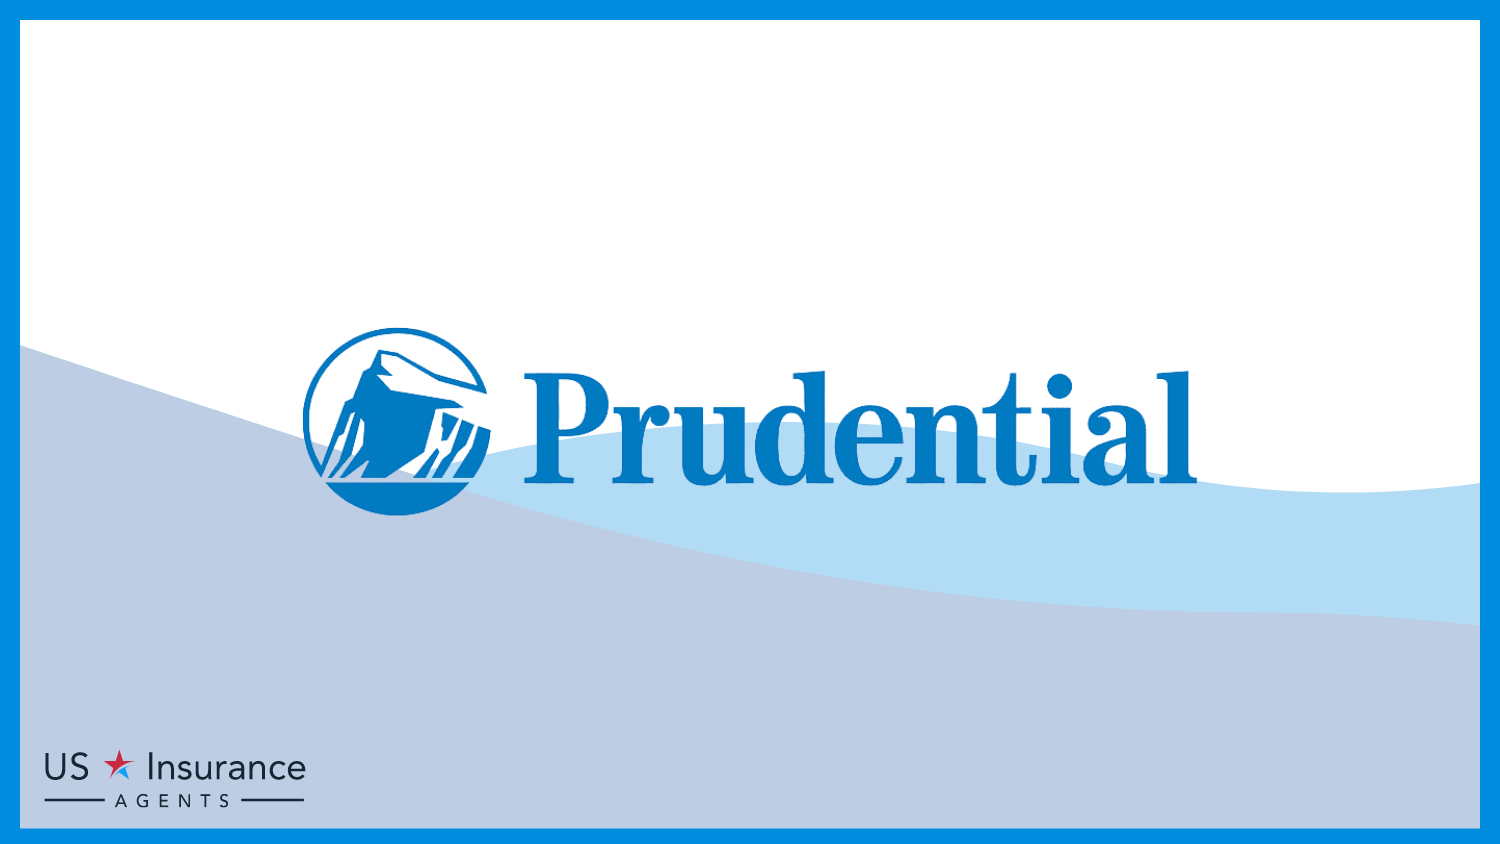 Prudential: Best Life Insurance for Siblings